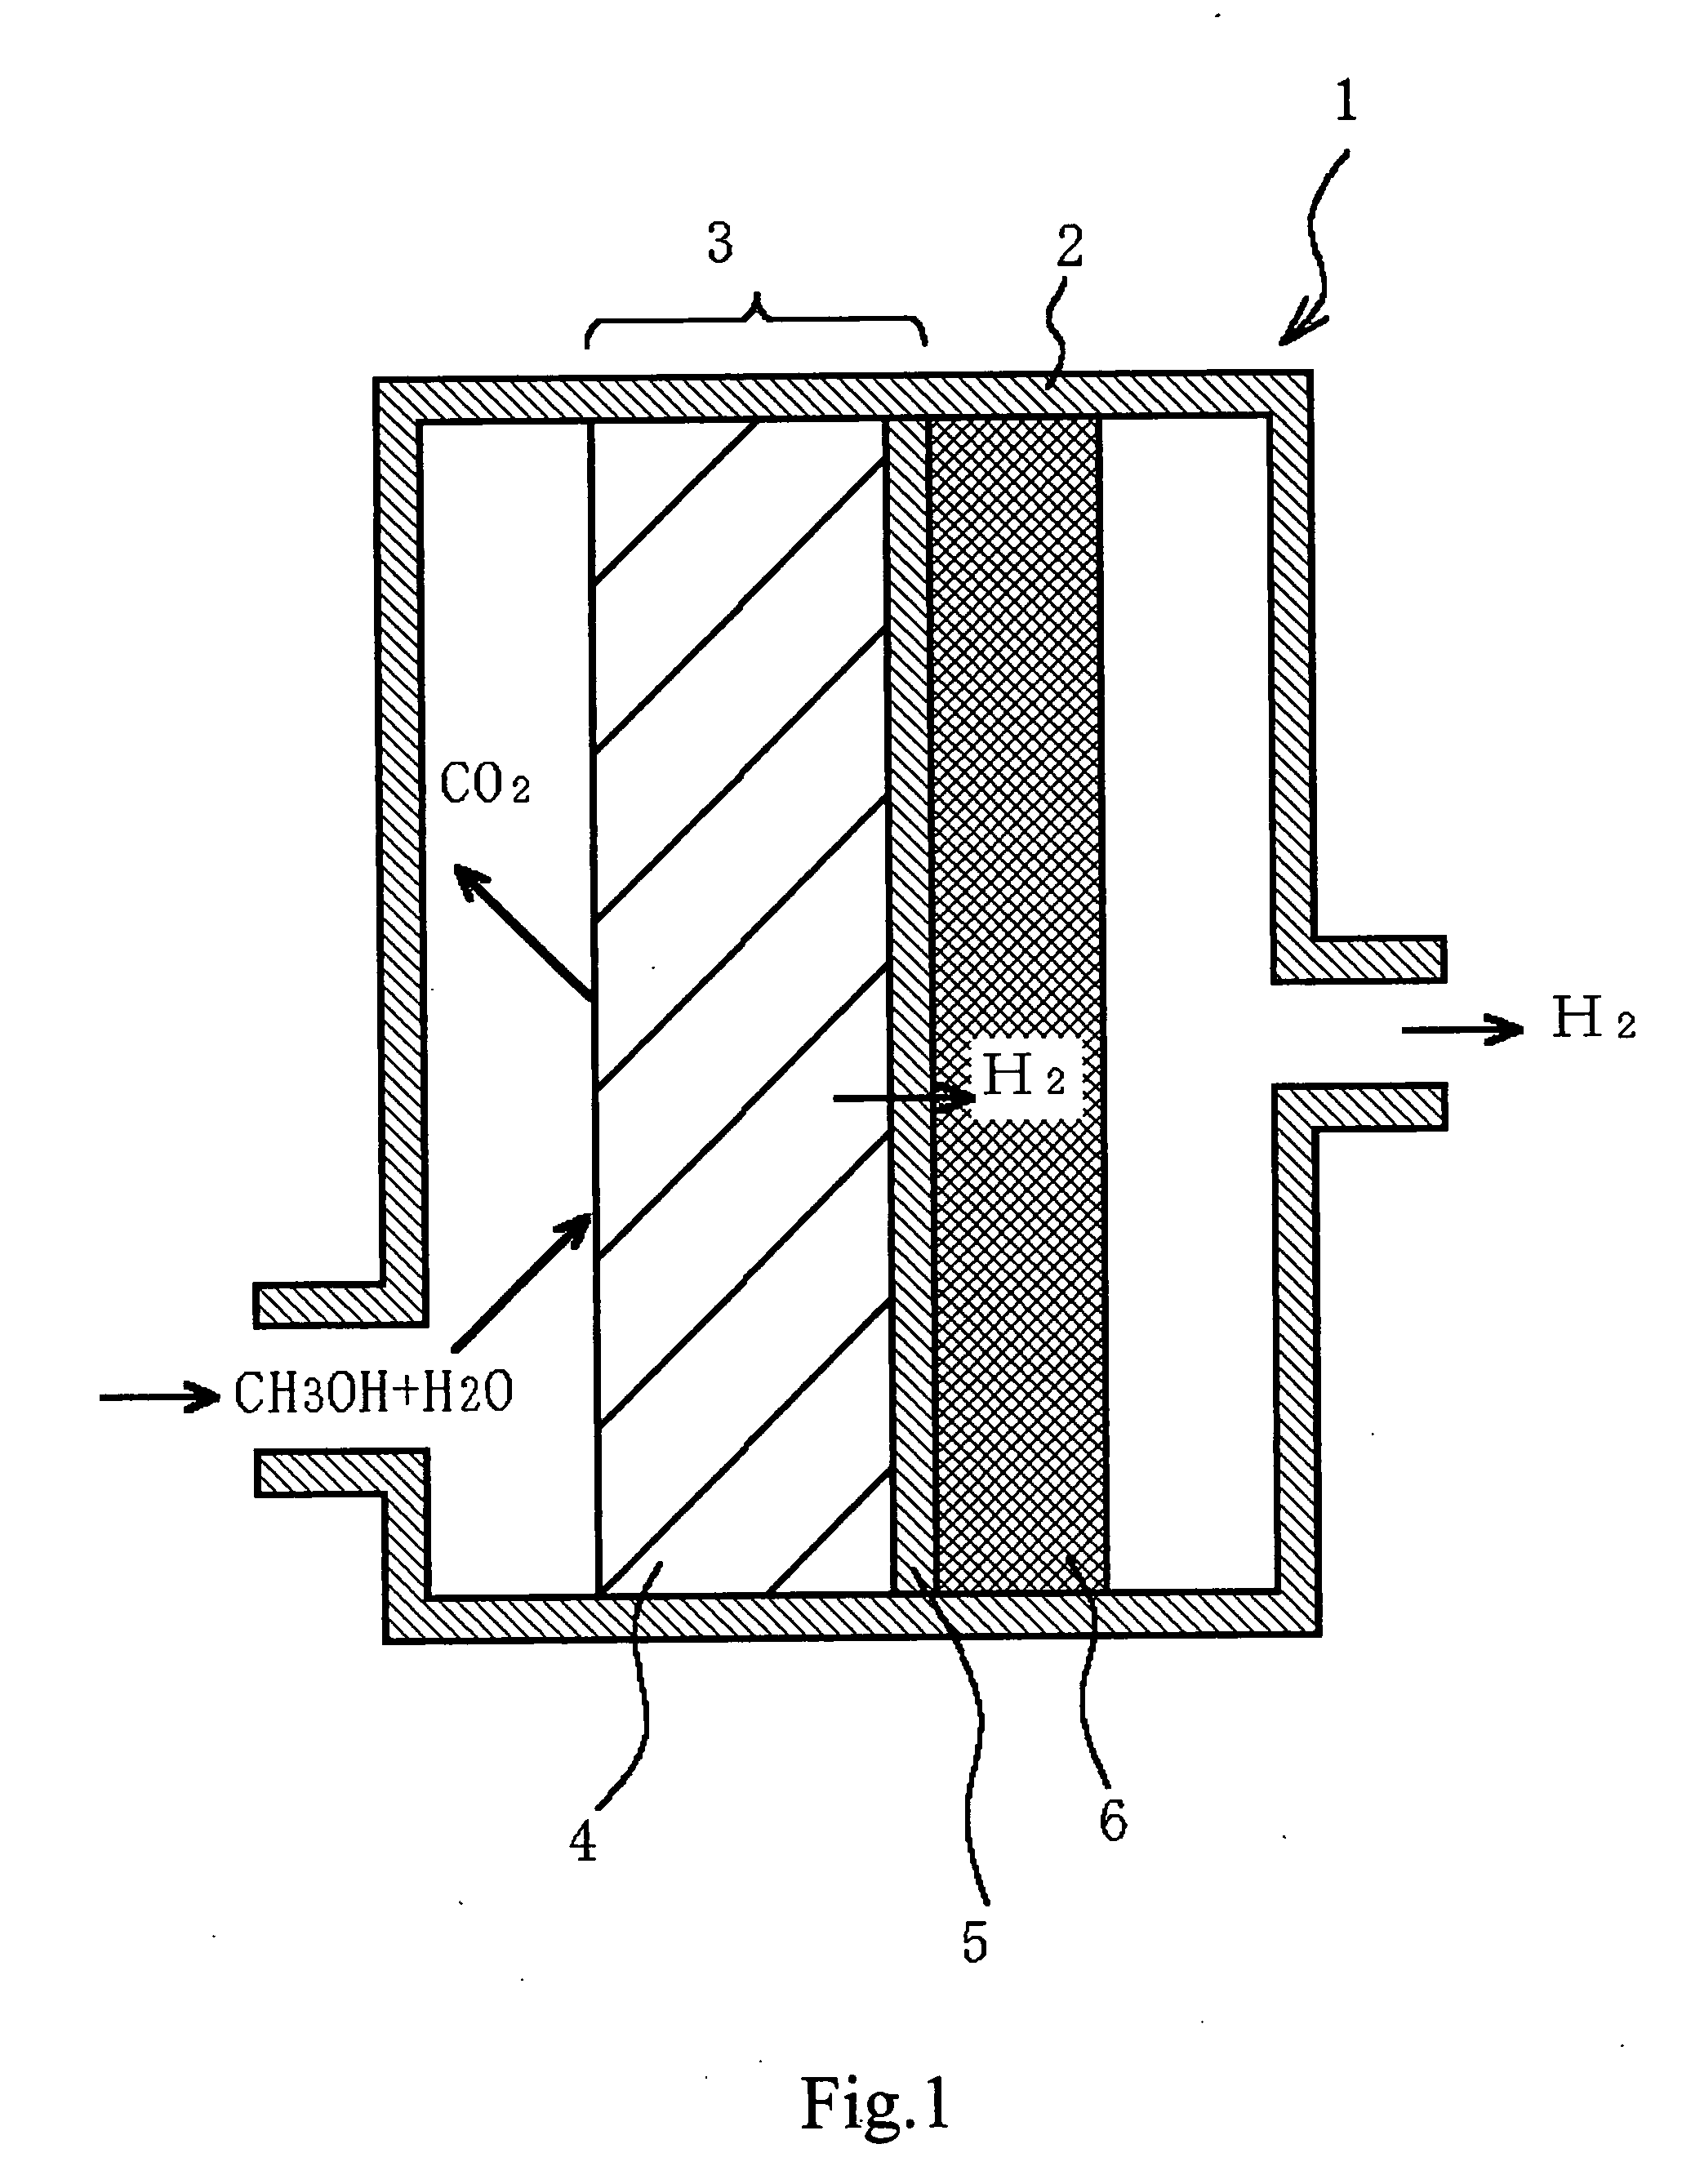 Fuel reformer and method of manufactruing the fuel reformer, electrode for electrochemical device, and electrochemical device